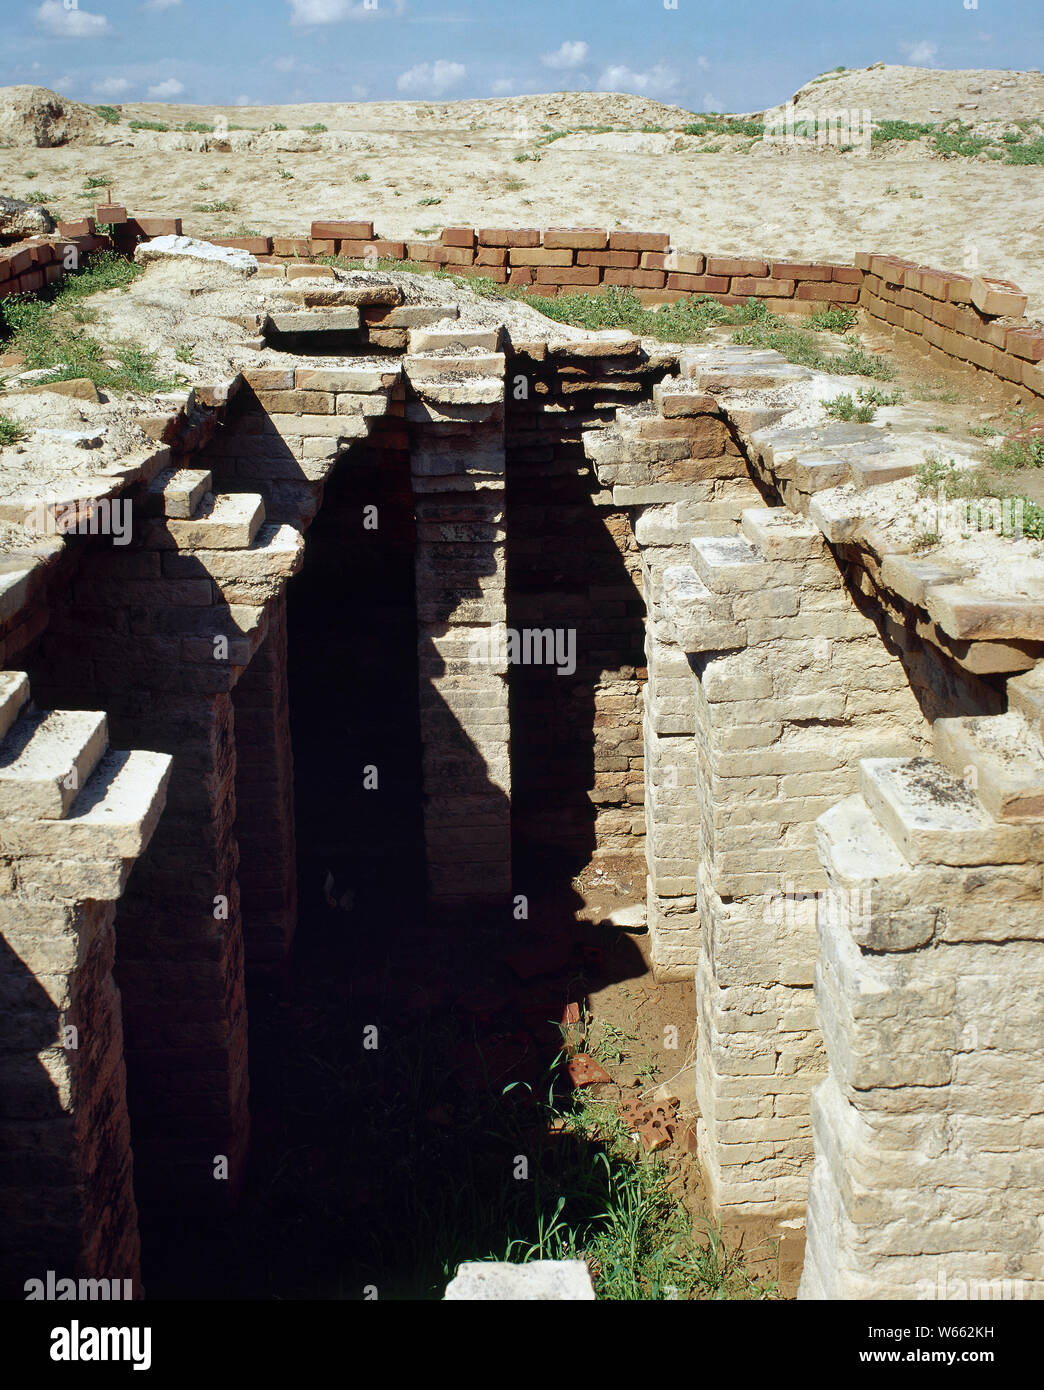 Syria. Mari. Remains of the ancient city founded in 2900 BC. (Picture taken before the Syrian Civil War). Stock Photo